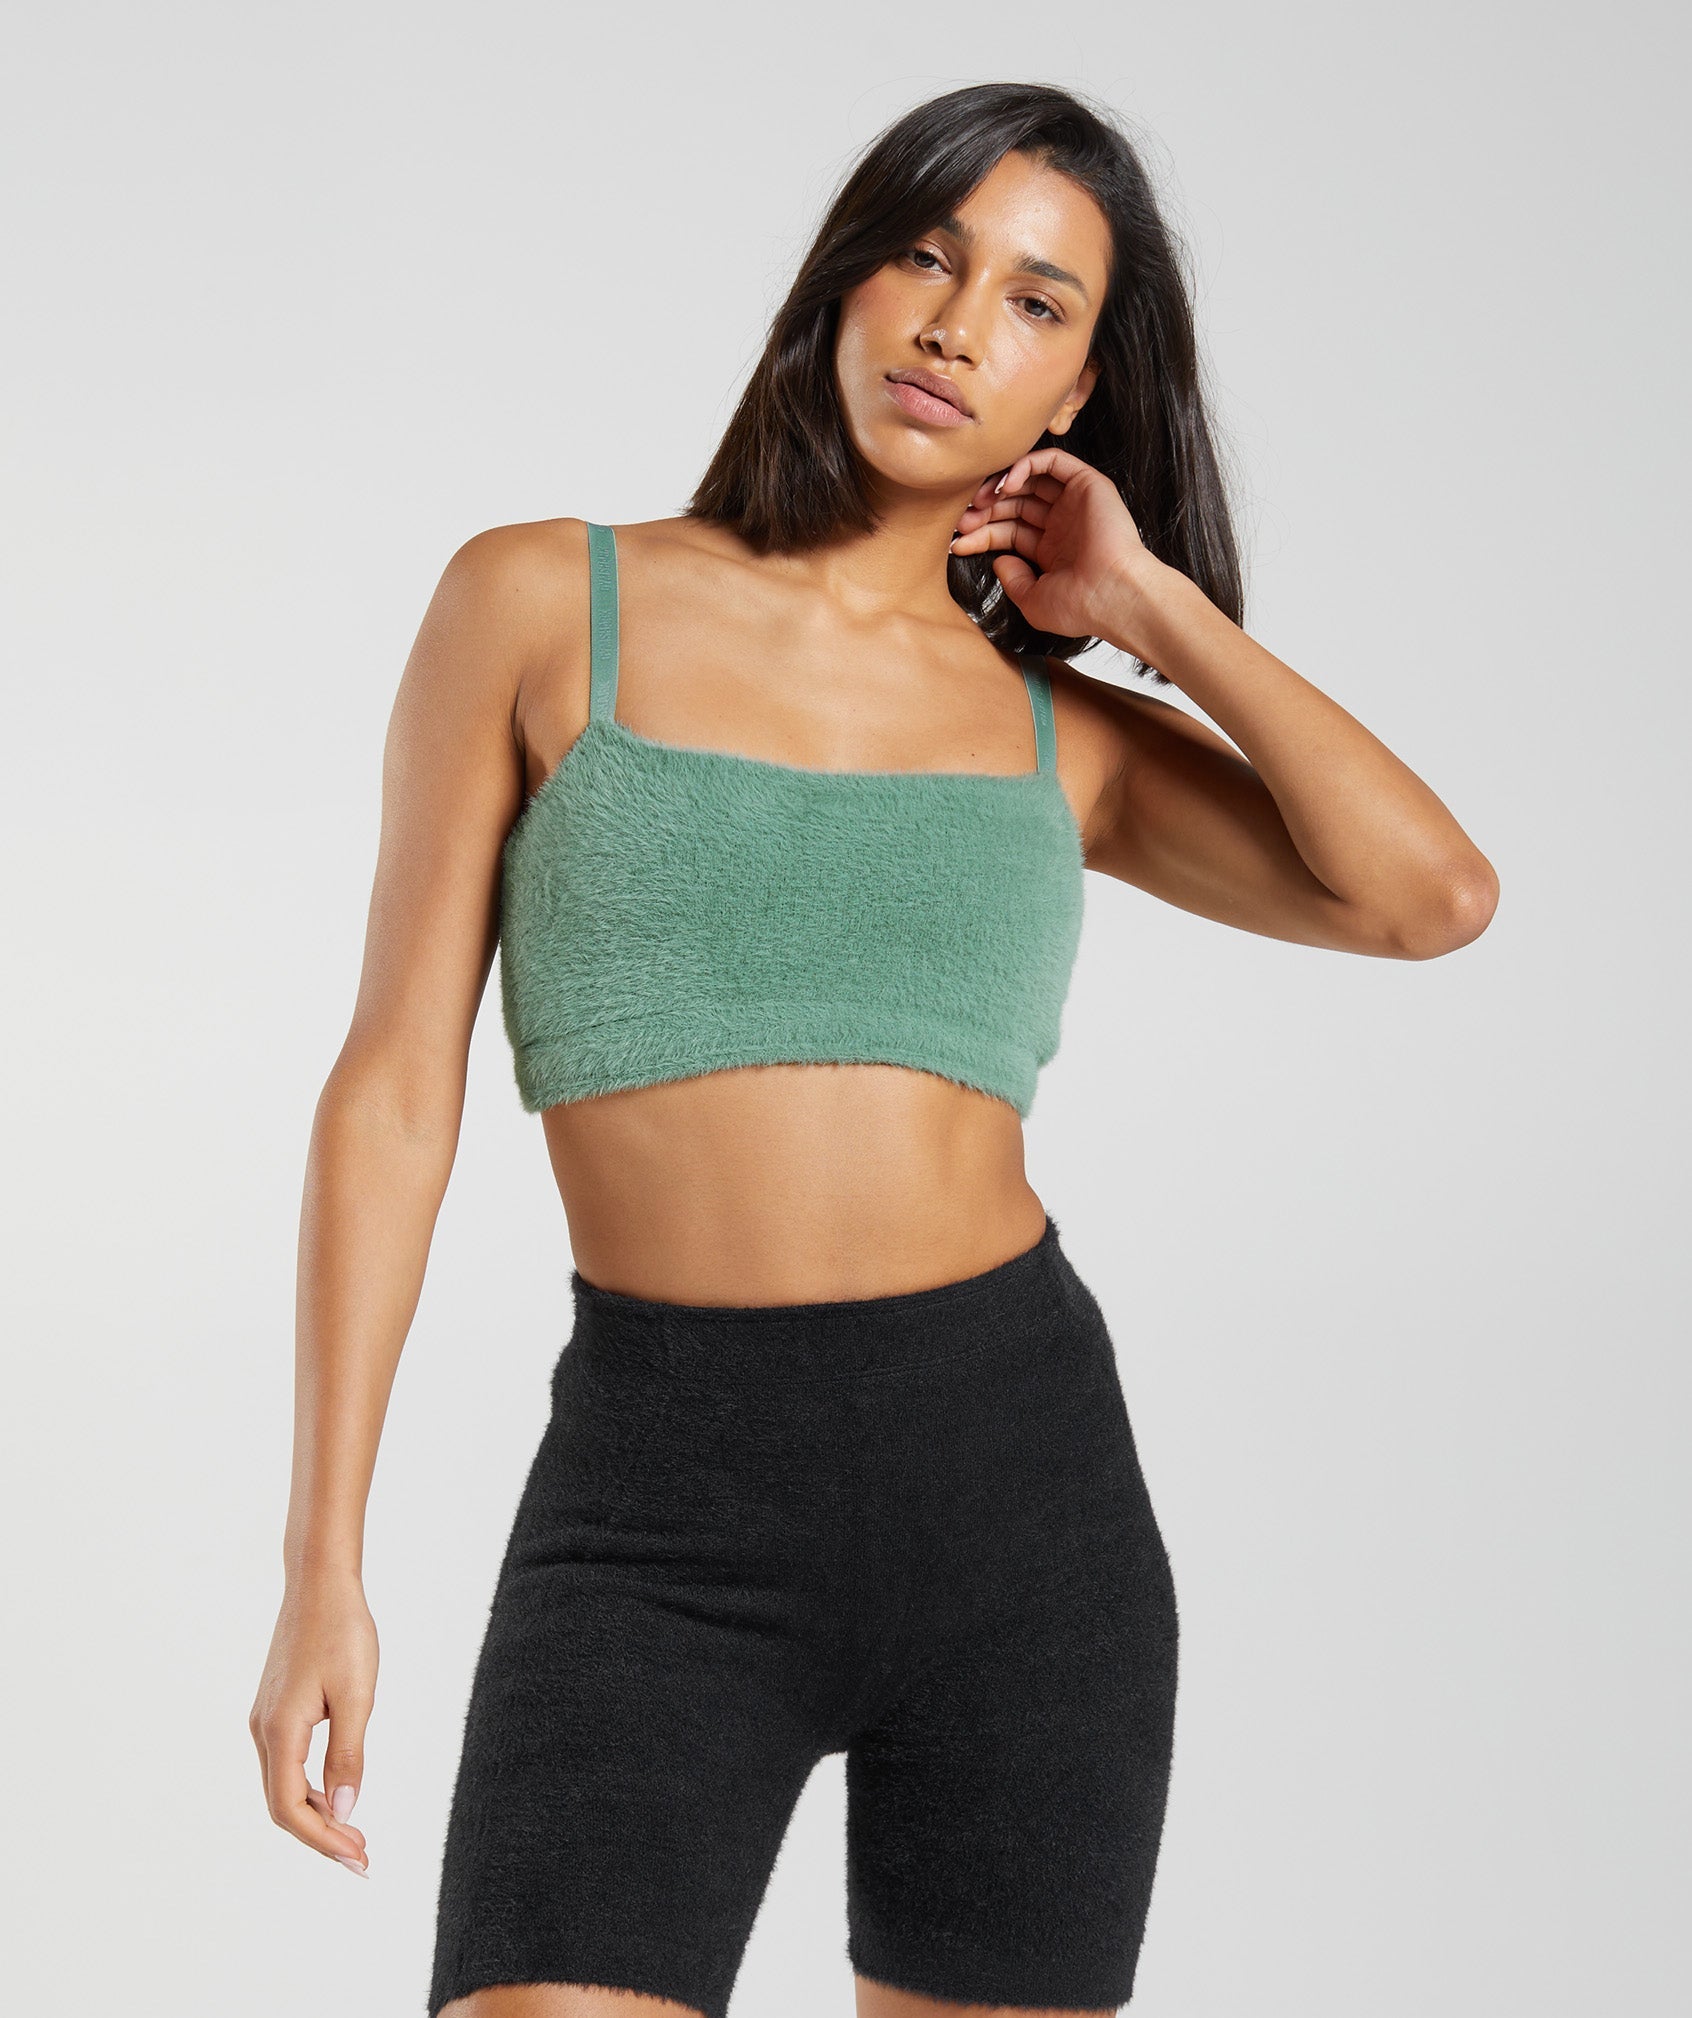 Whitney Simmons - GYMSHARK DROP! Towel tops, Oversized joggers, and the  cropped sweatshirts! The most beautiful lifestyle pieces in suppper cute  colors. I wear a small in both tops and bottoms but